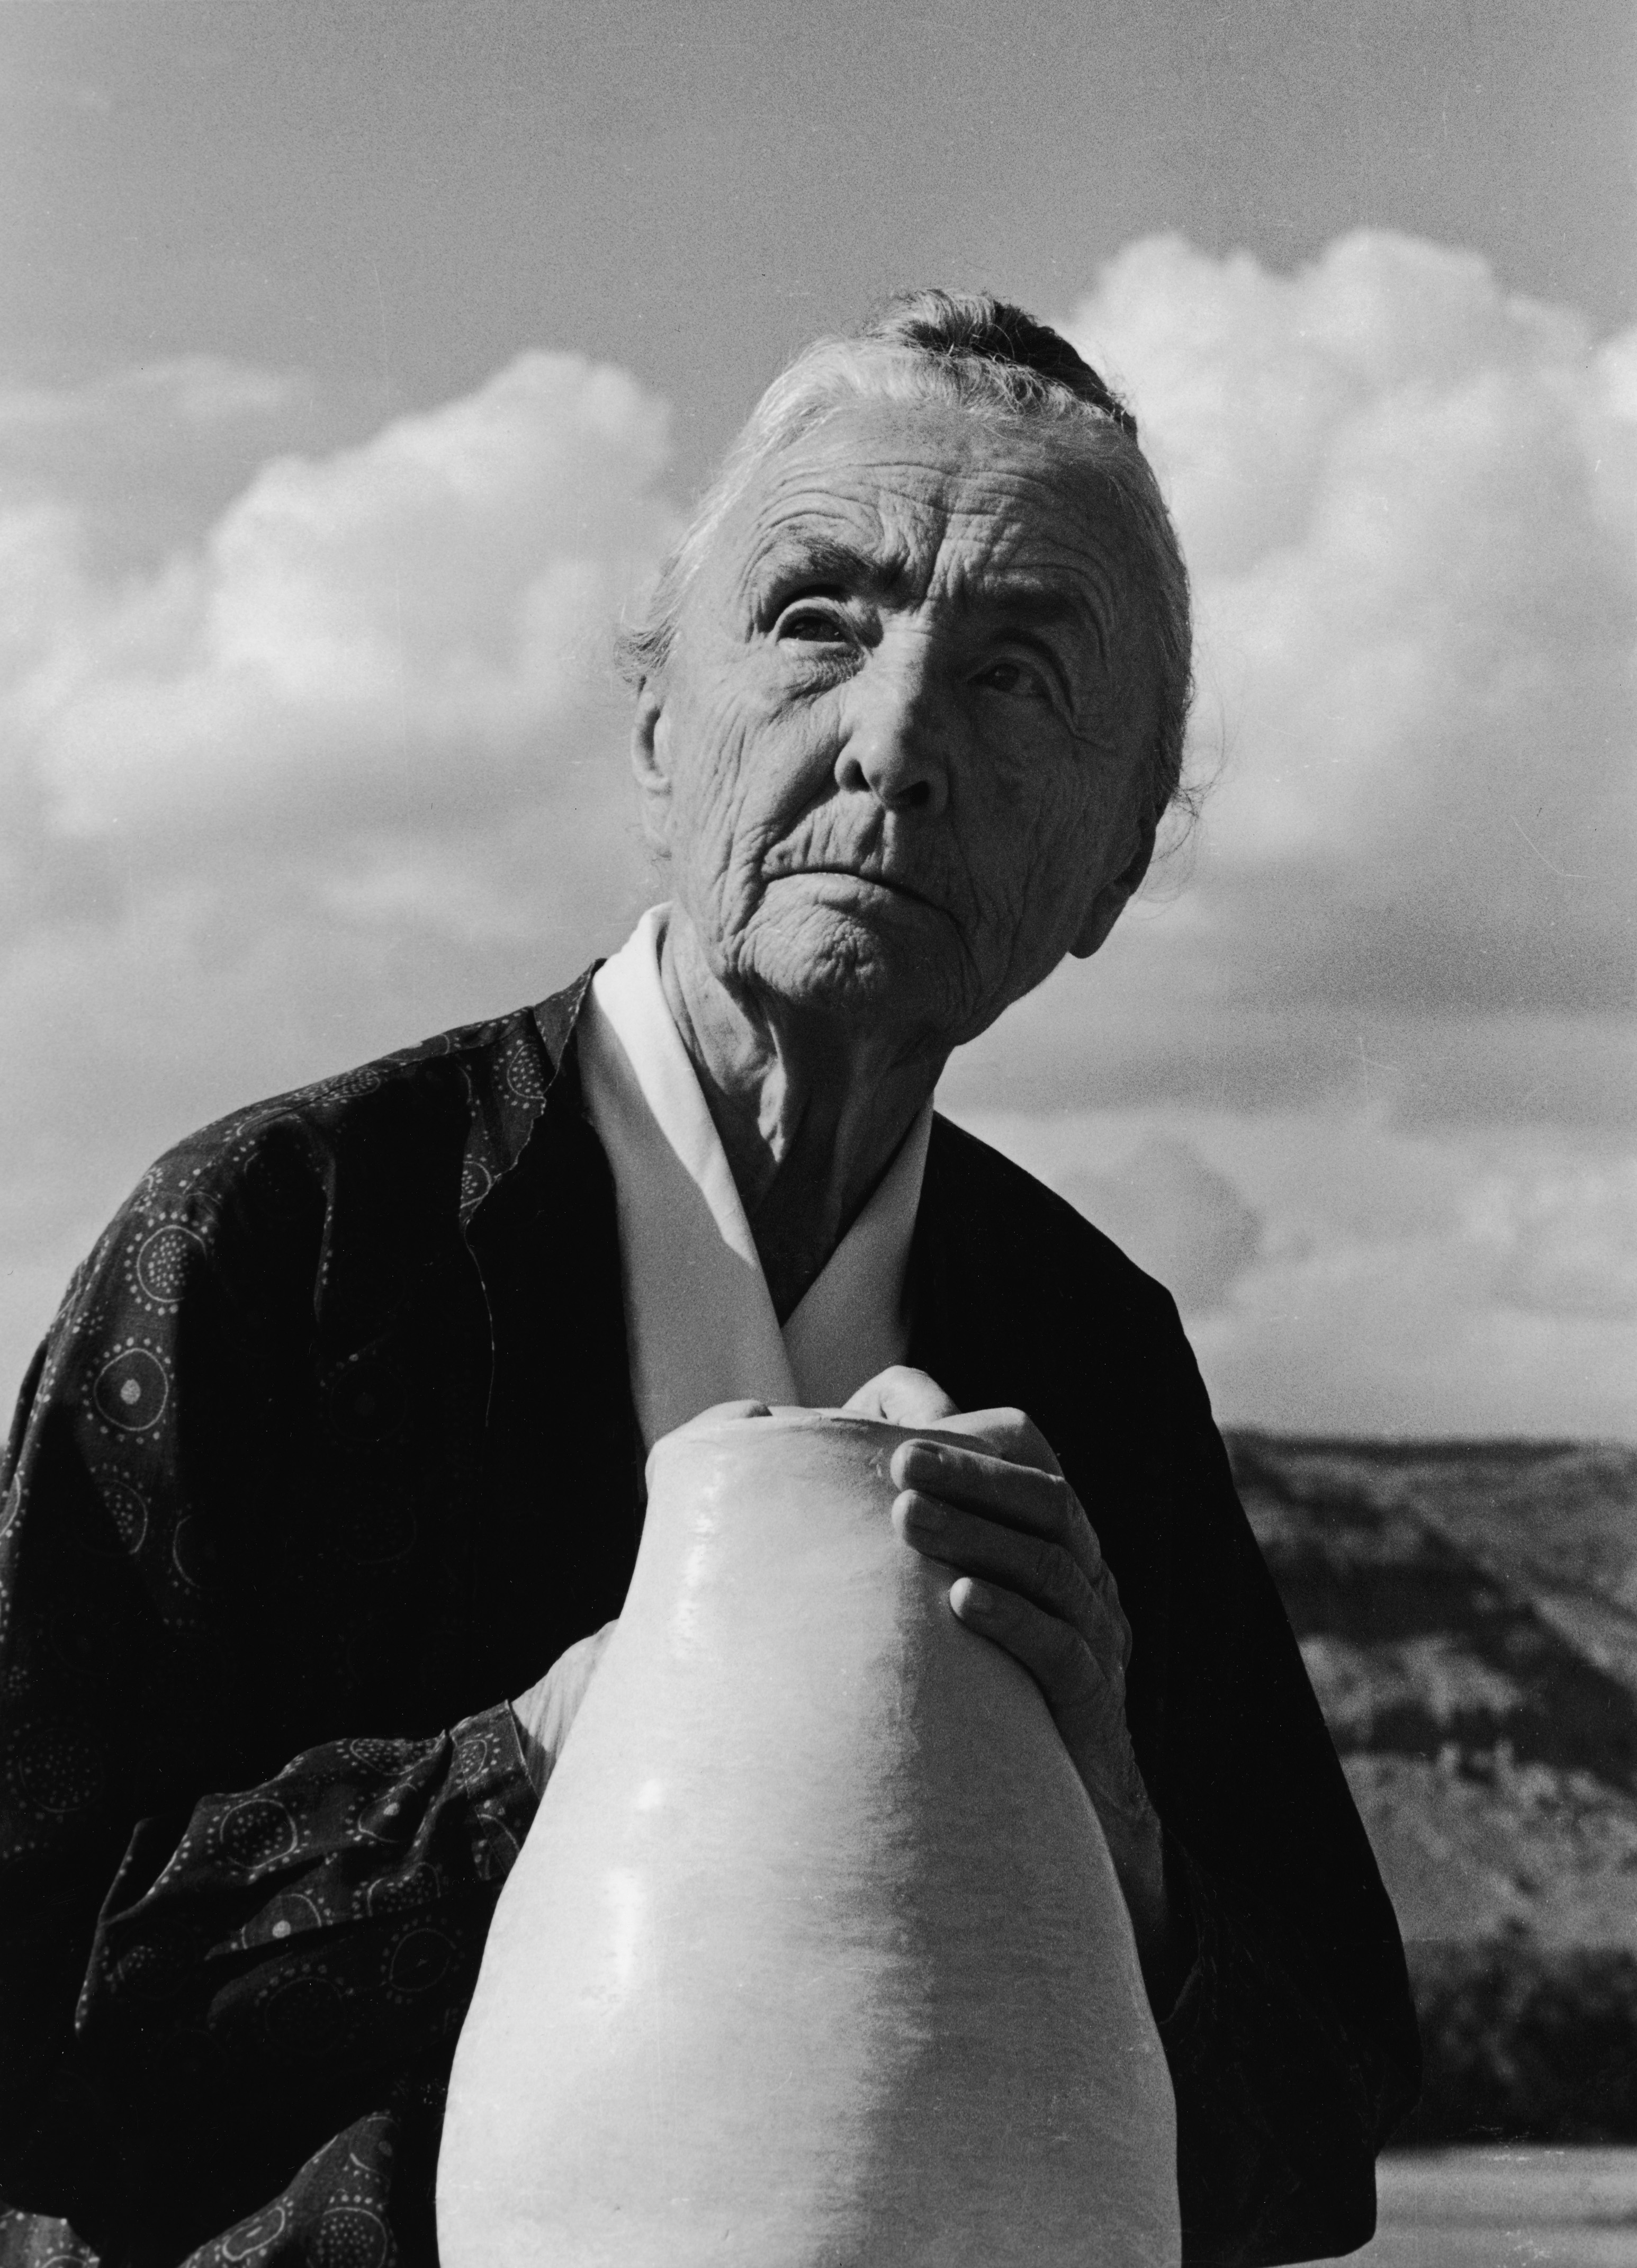 American artist Georgia O'Keeffe looks off into the distance with her hands on a piece of pottery, Abiquiu, New Mexico, 1974. (Joe Munroe&amp;mdash;Getty Images)